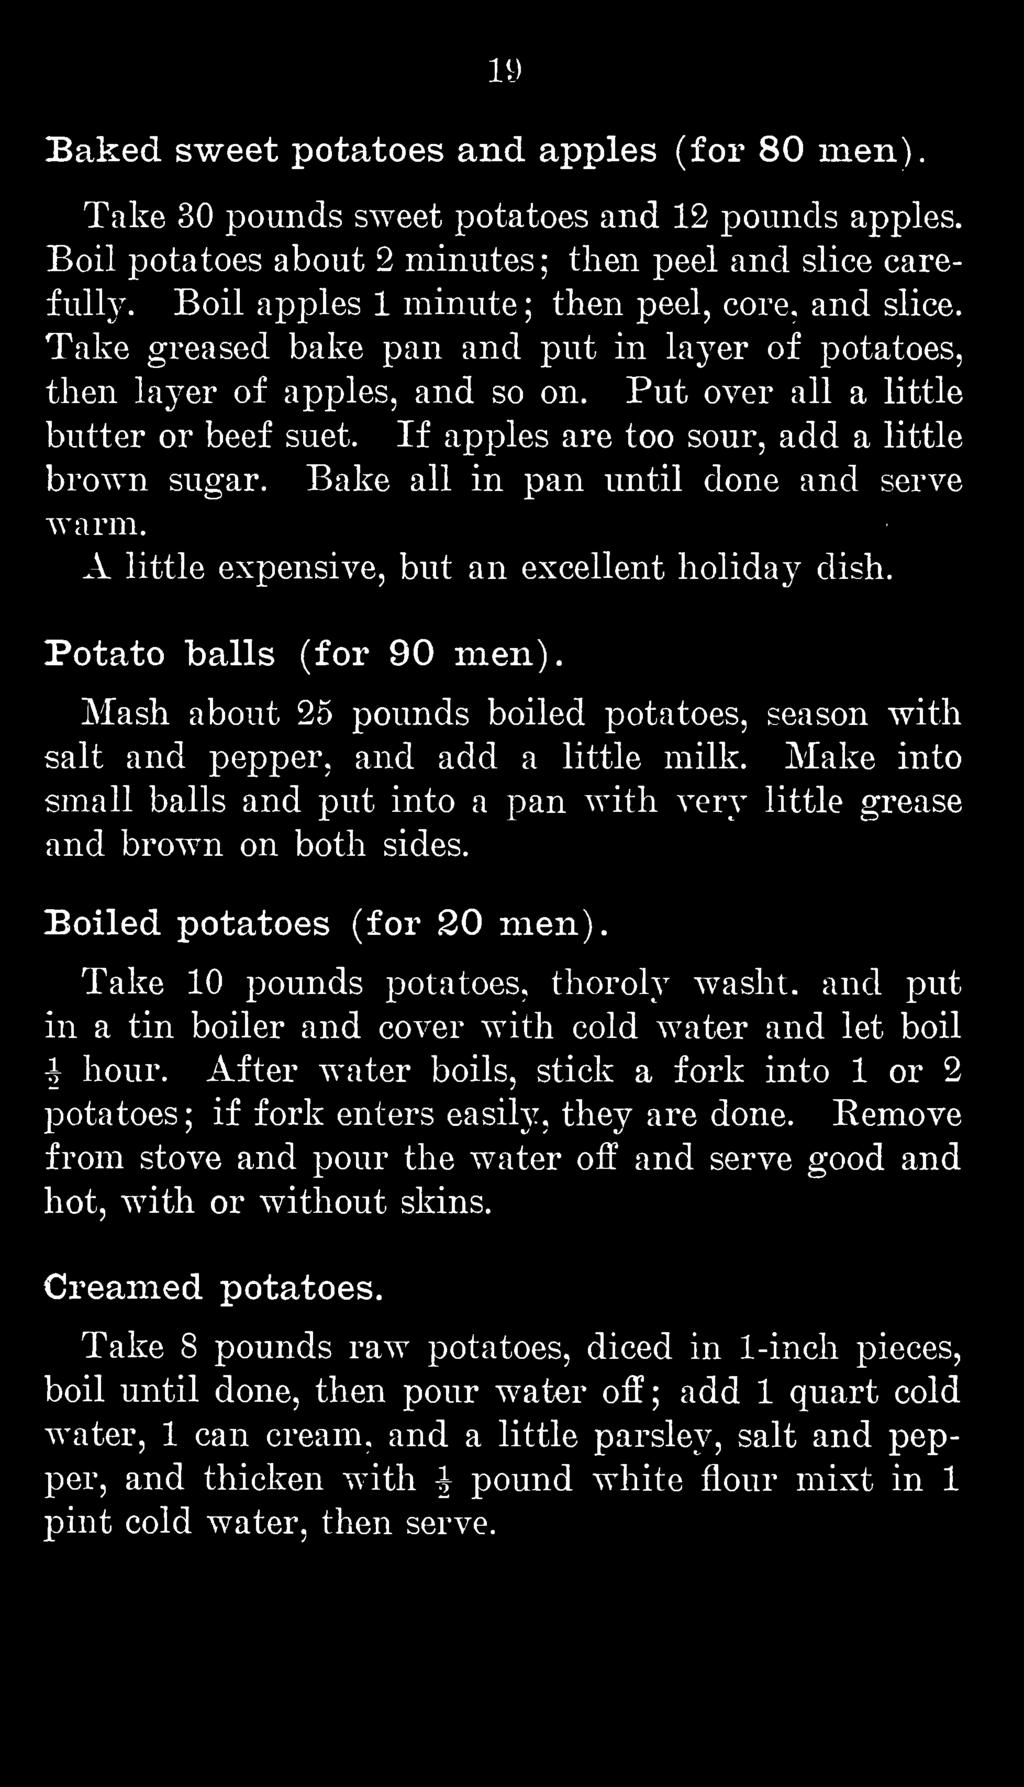 Put over all a little butter or beef suet. If apples are too sour, add a little brown sugar. Bake all in pan until done and serve warm. A little expensive, but an excellent holiday dish.